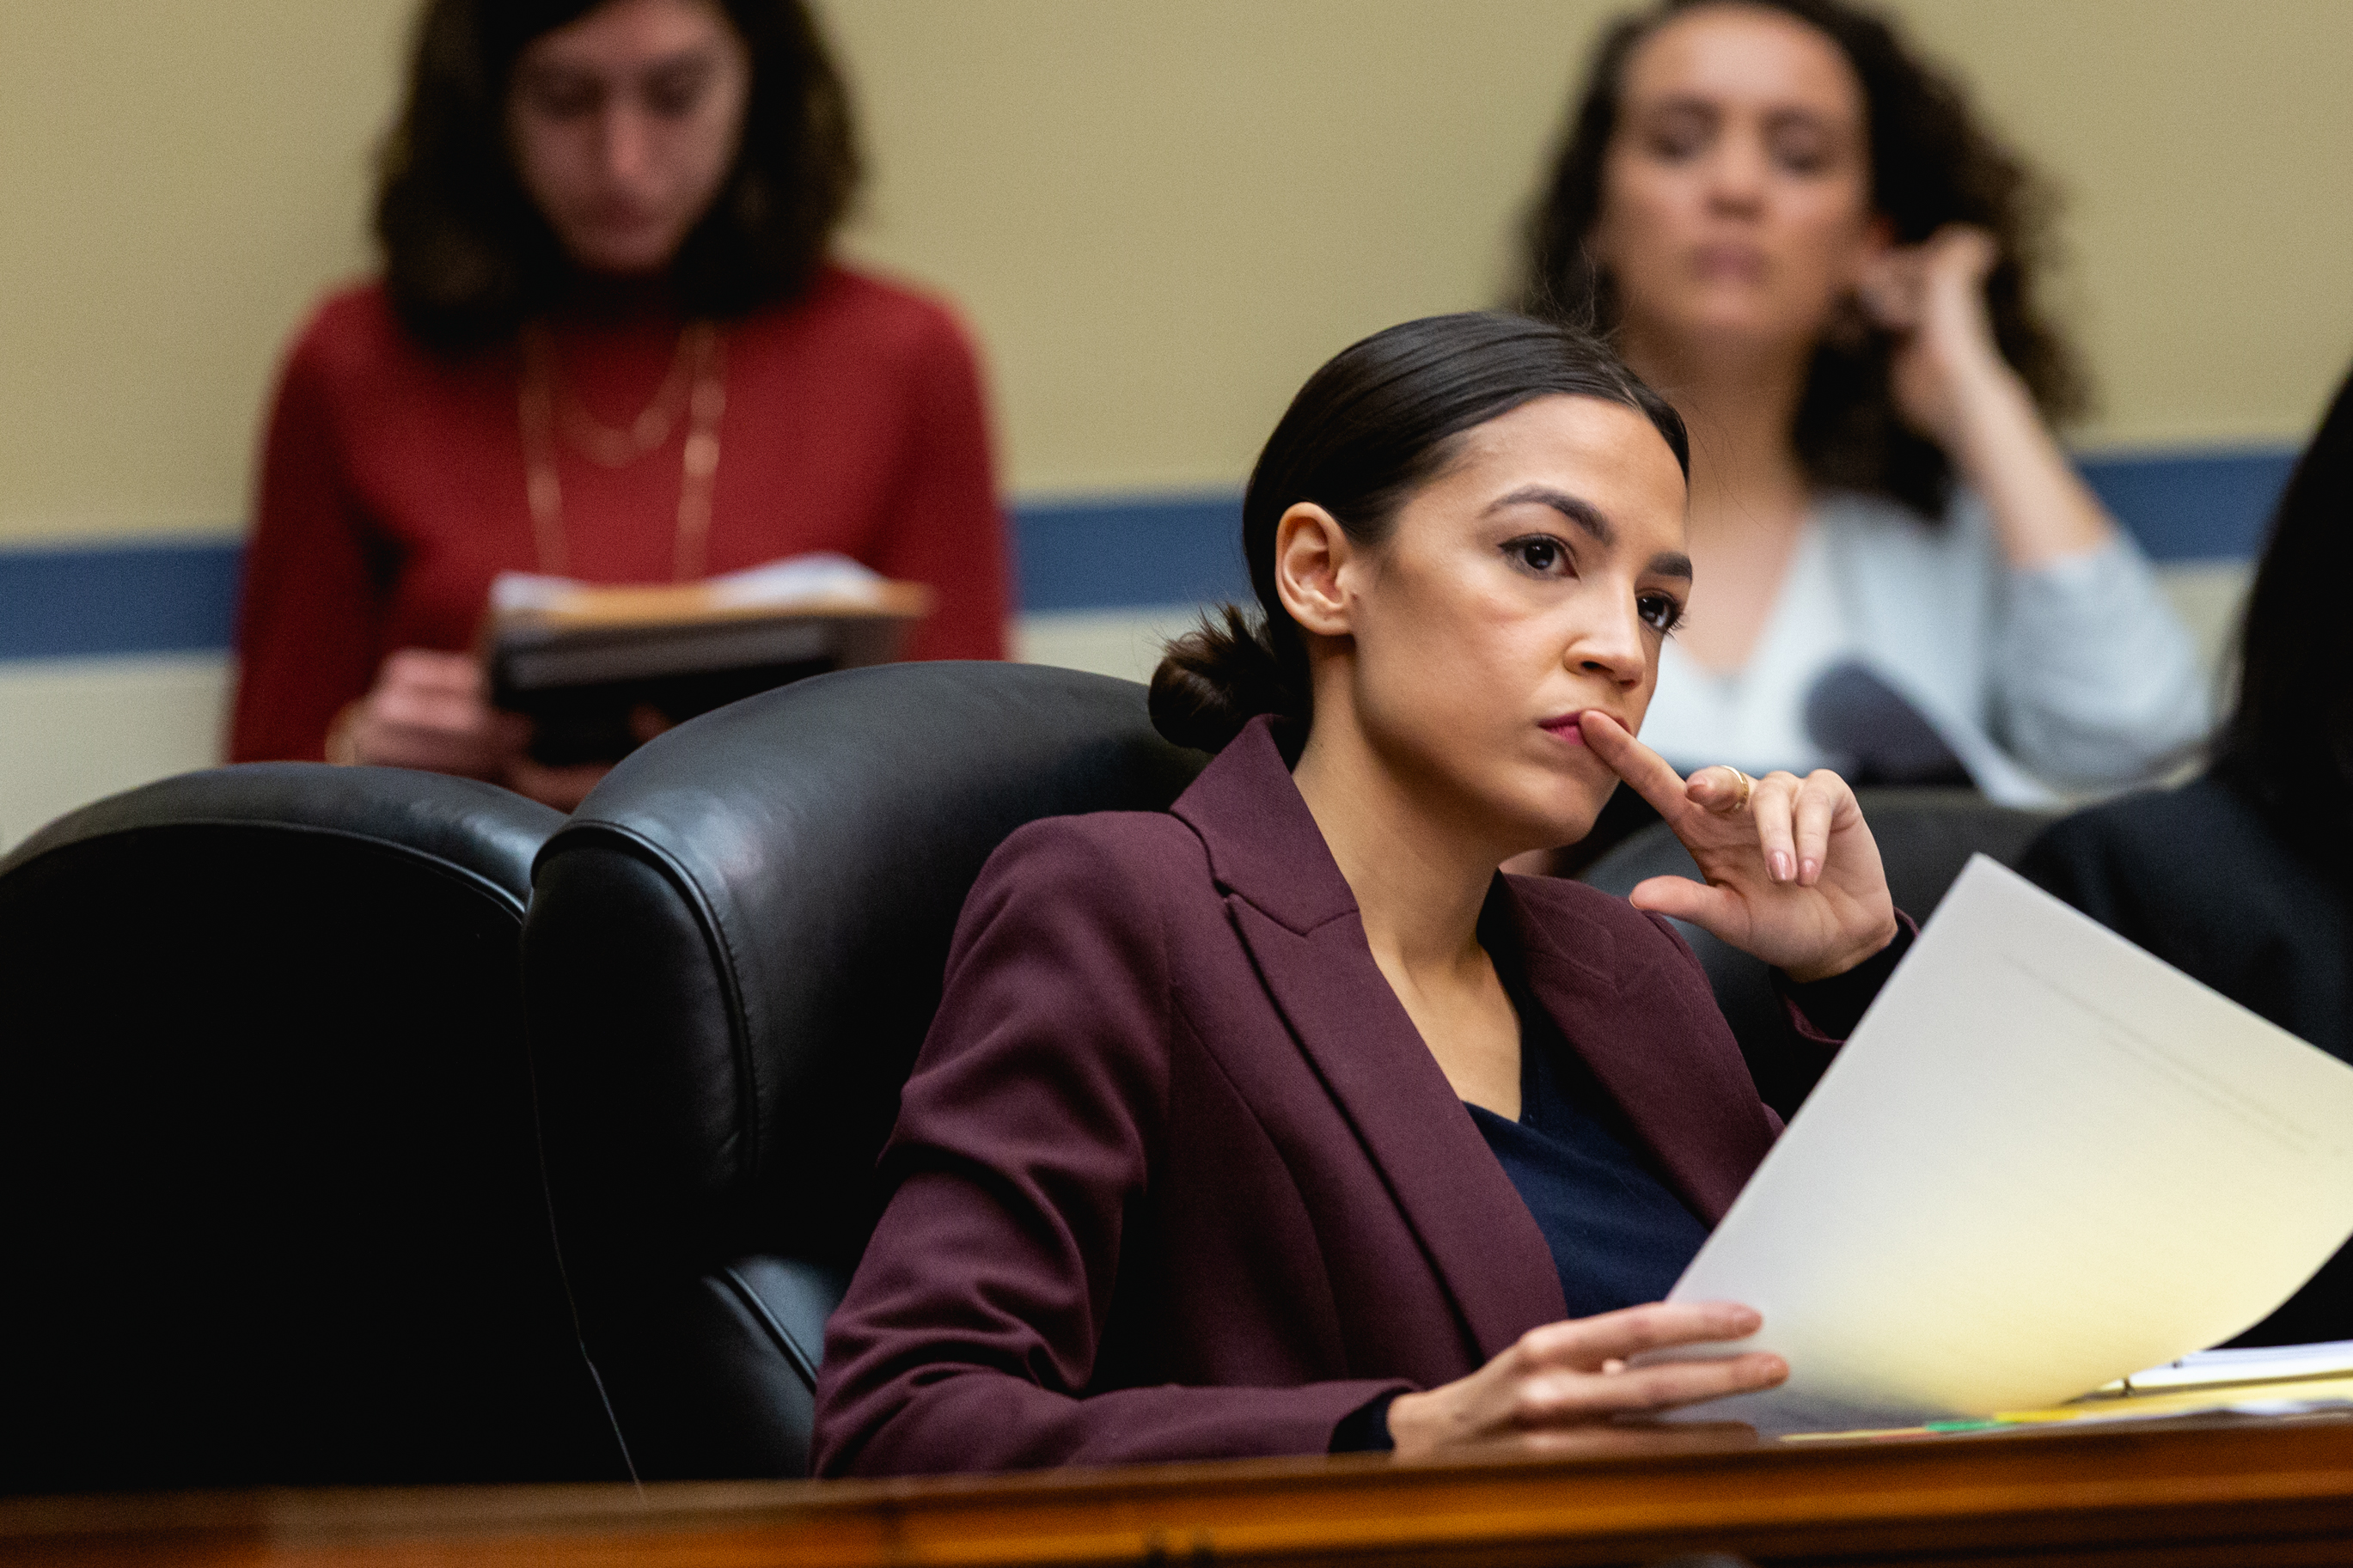 Rep. Alexandria Ocasio-Cortez (D-NY), listens as Michael Cohen, former lawyer for U.S. President Donald Trump, testifies before the House Oversight Committee on Capitol Hill, on Wednesday, February 27, 2019.